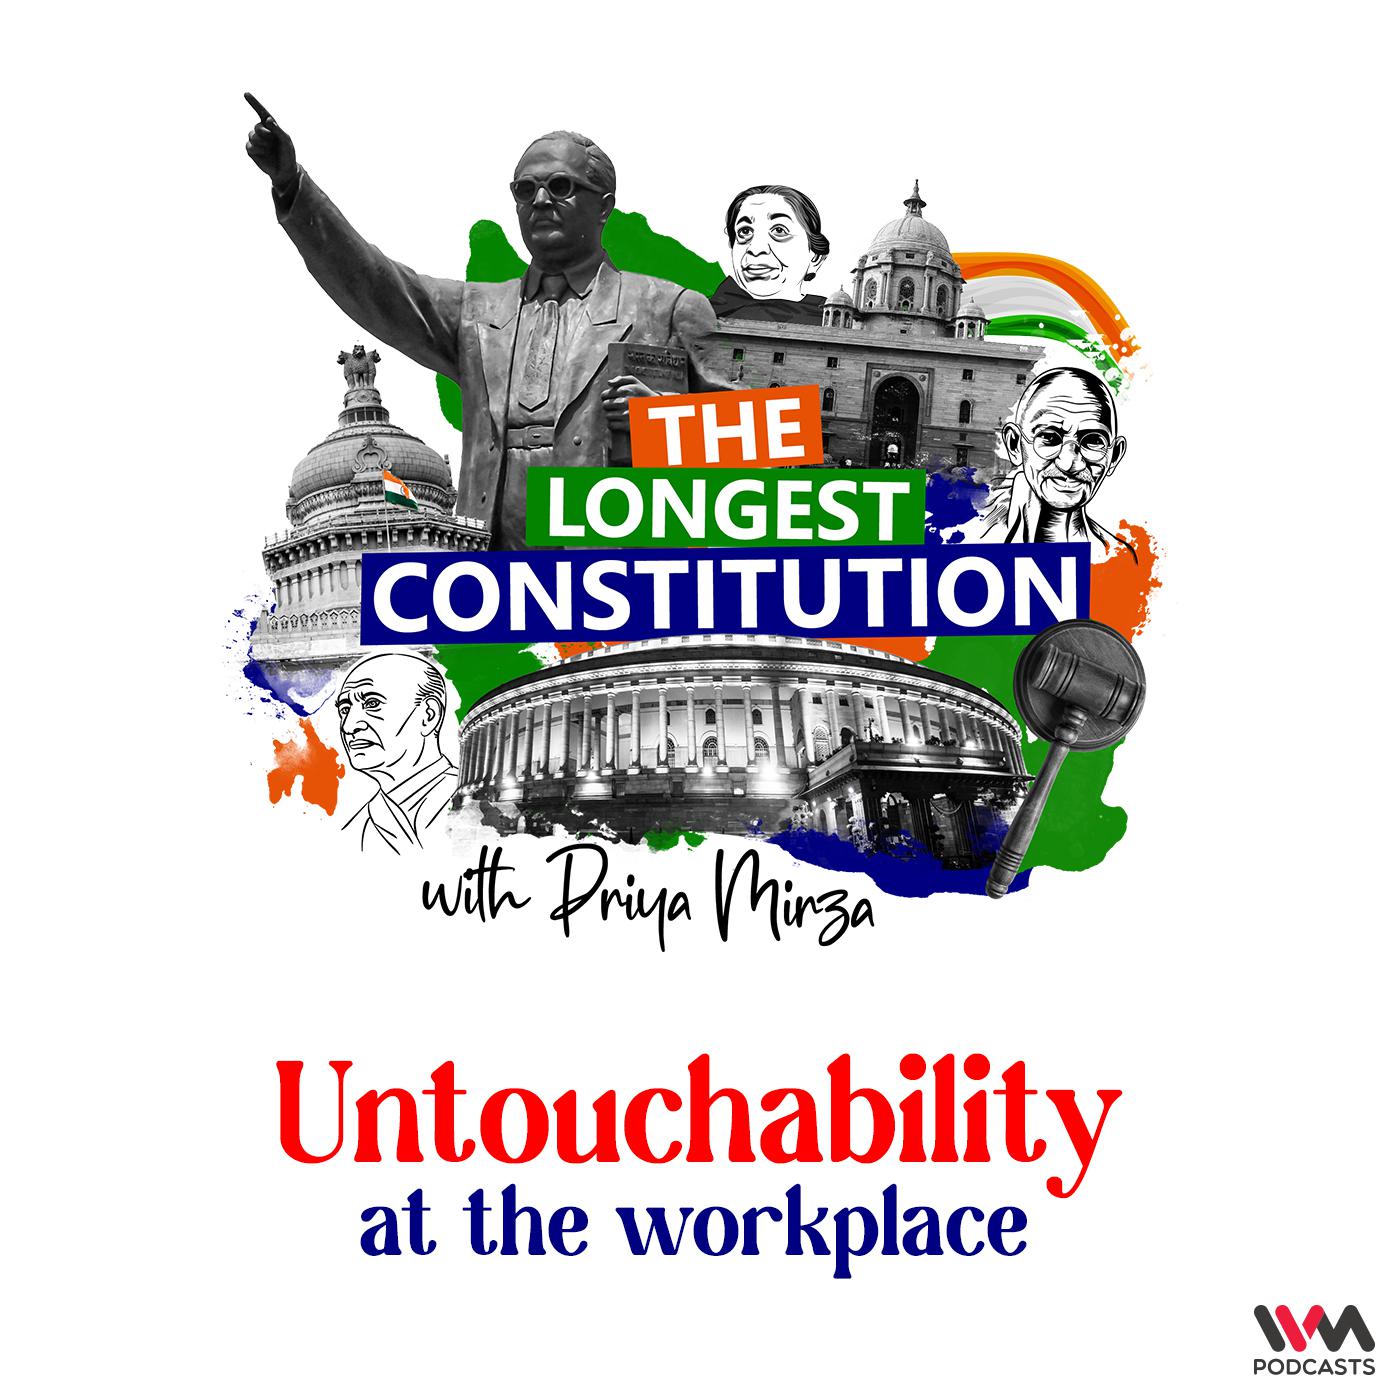 Untouchability at the workplace